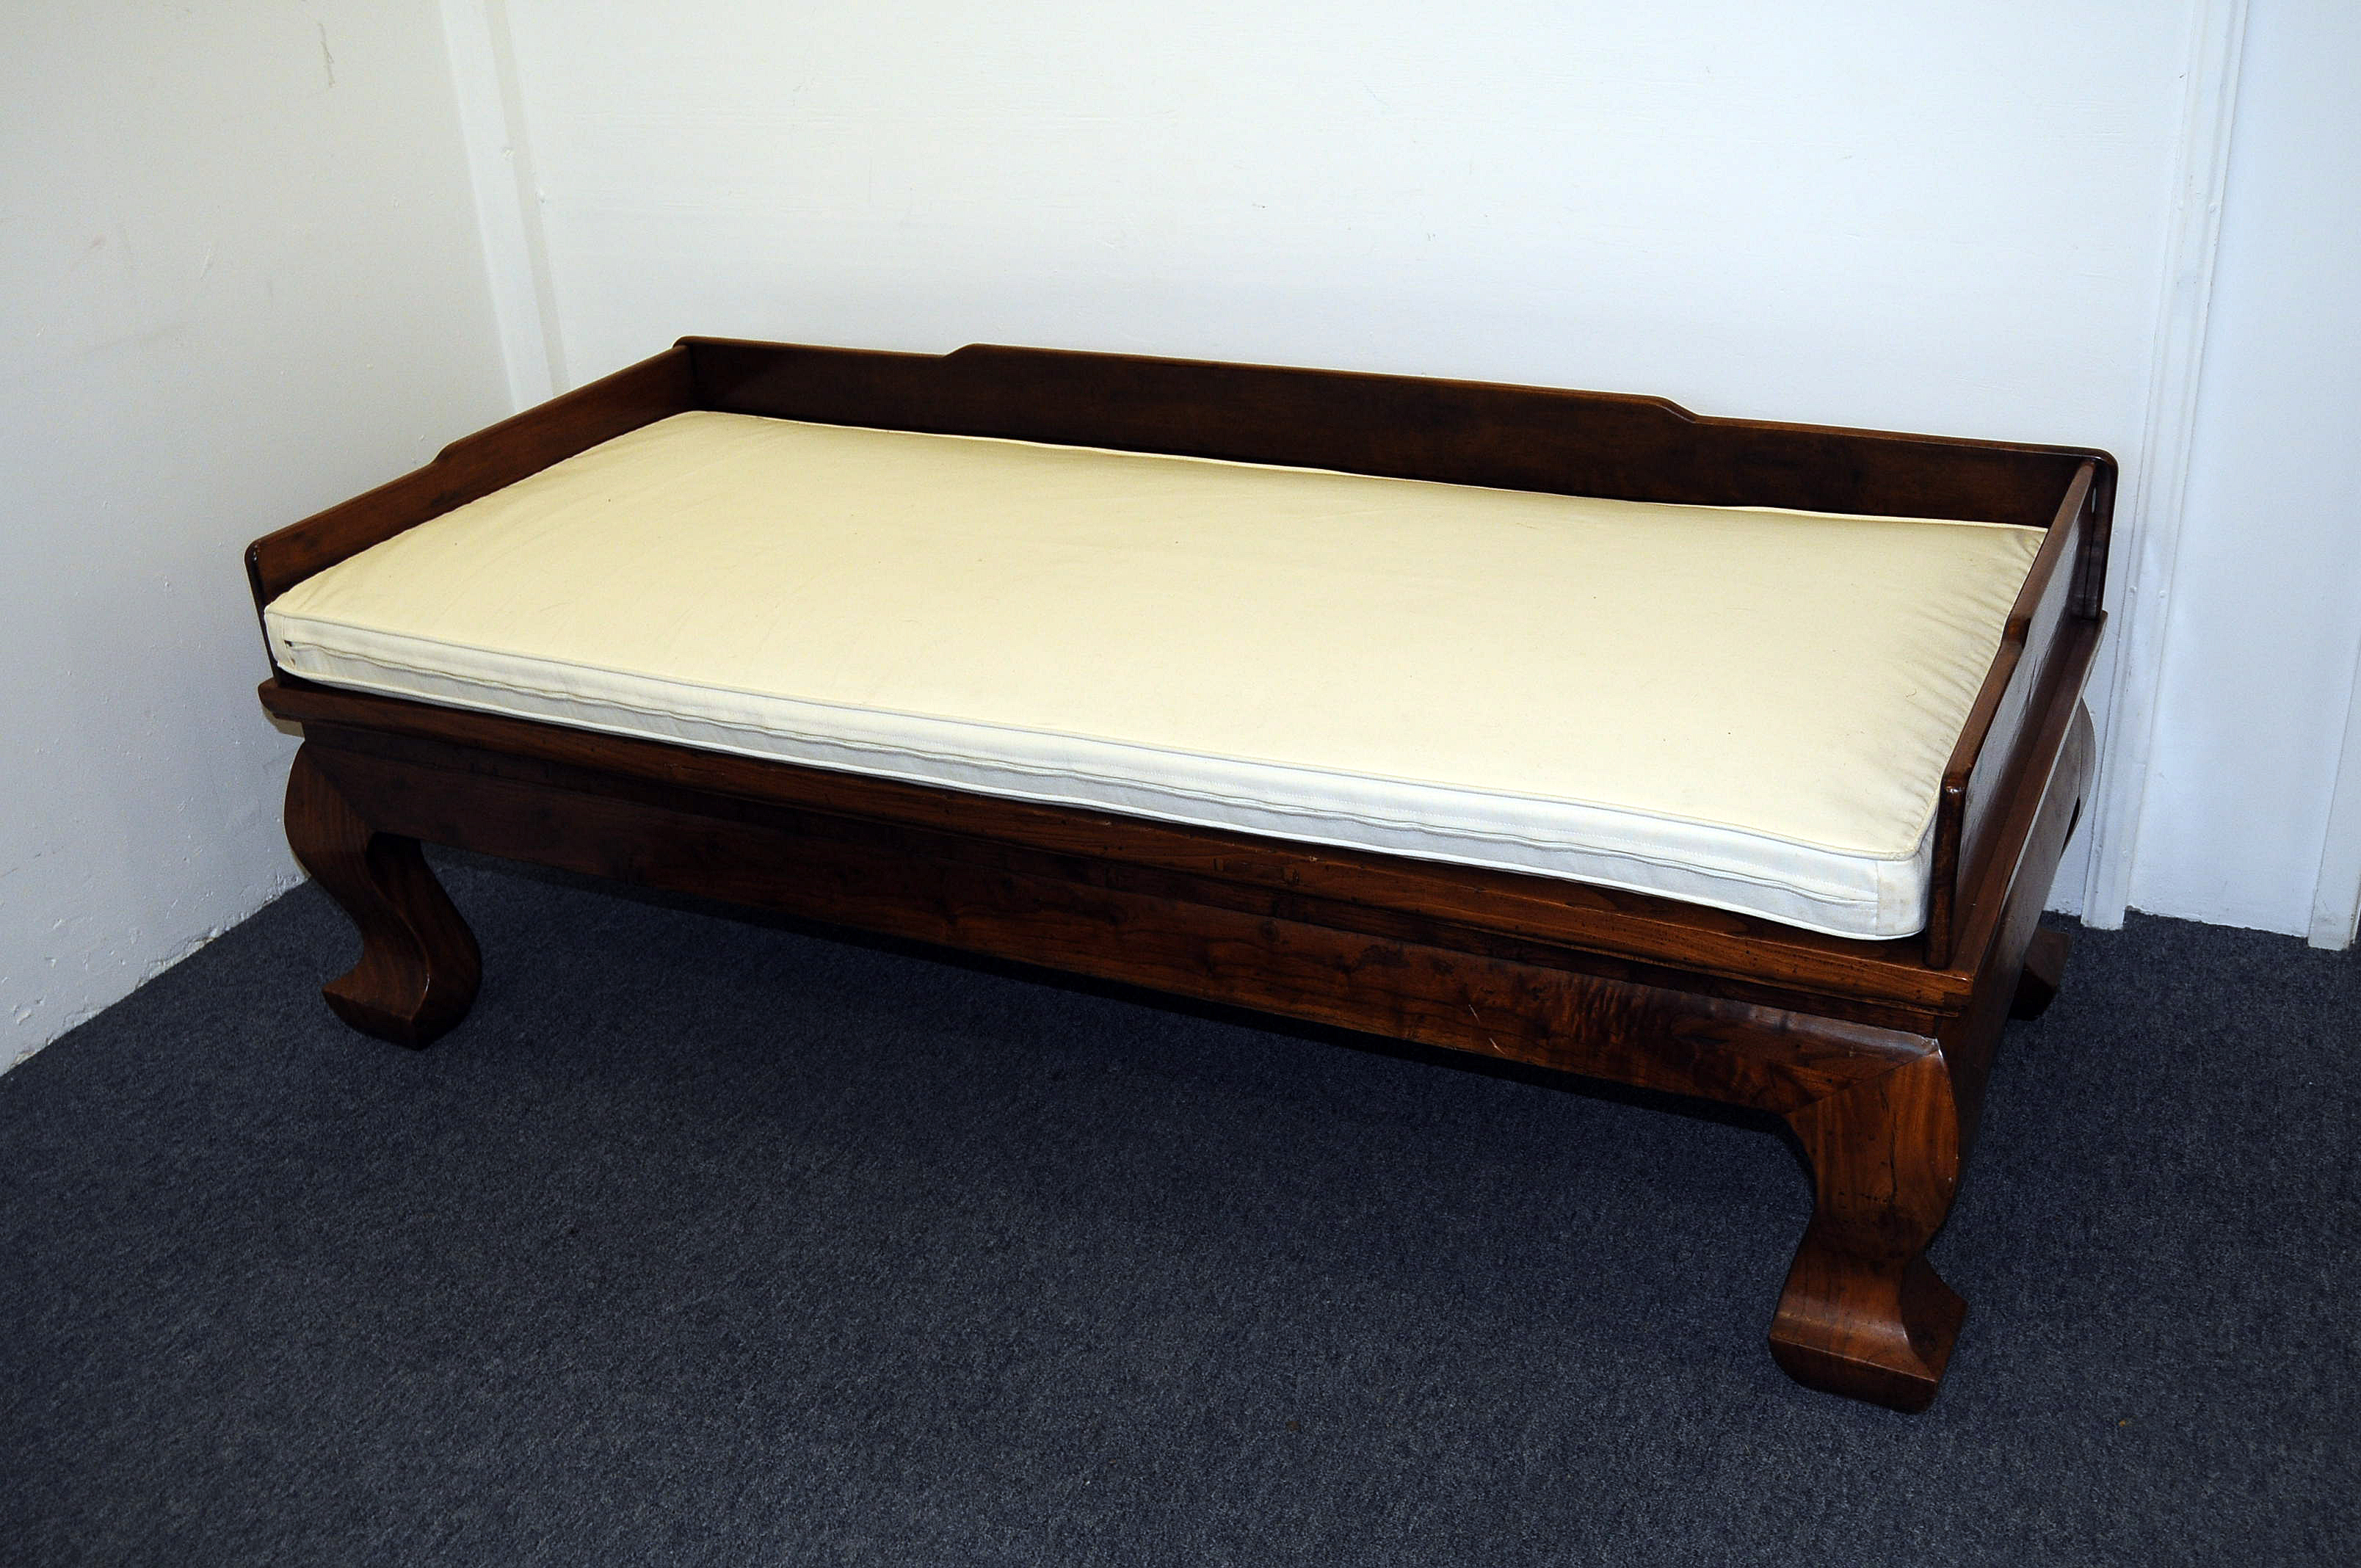 A Chinese Qing dynasty Luohan bed, or opium bed, from the Shangxi province of China, carved from elm